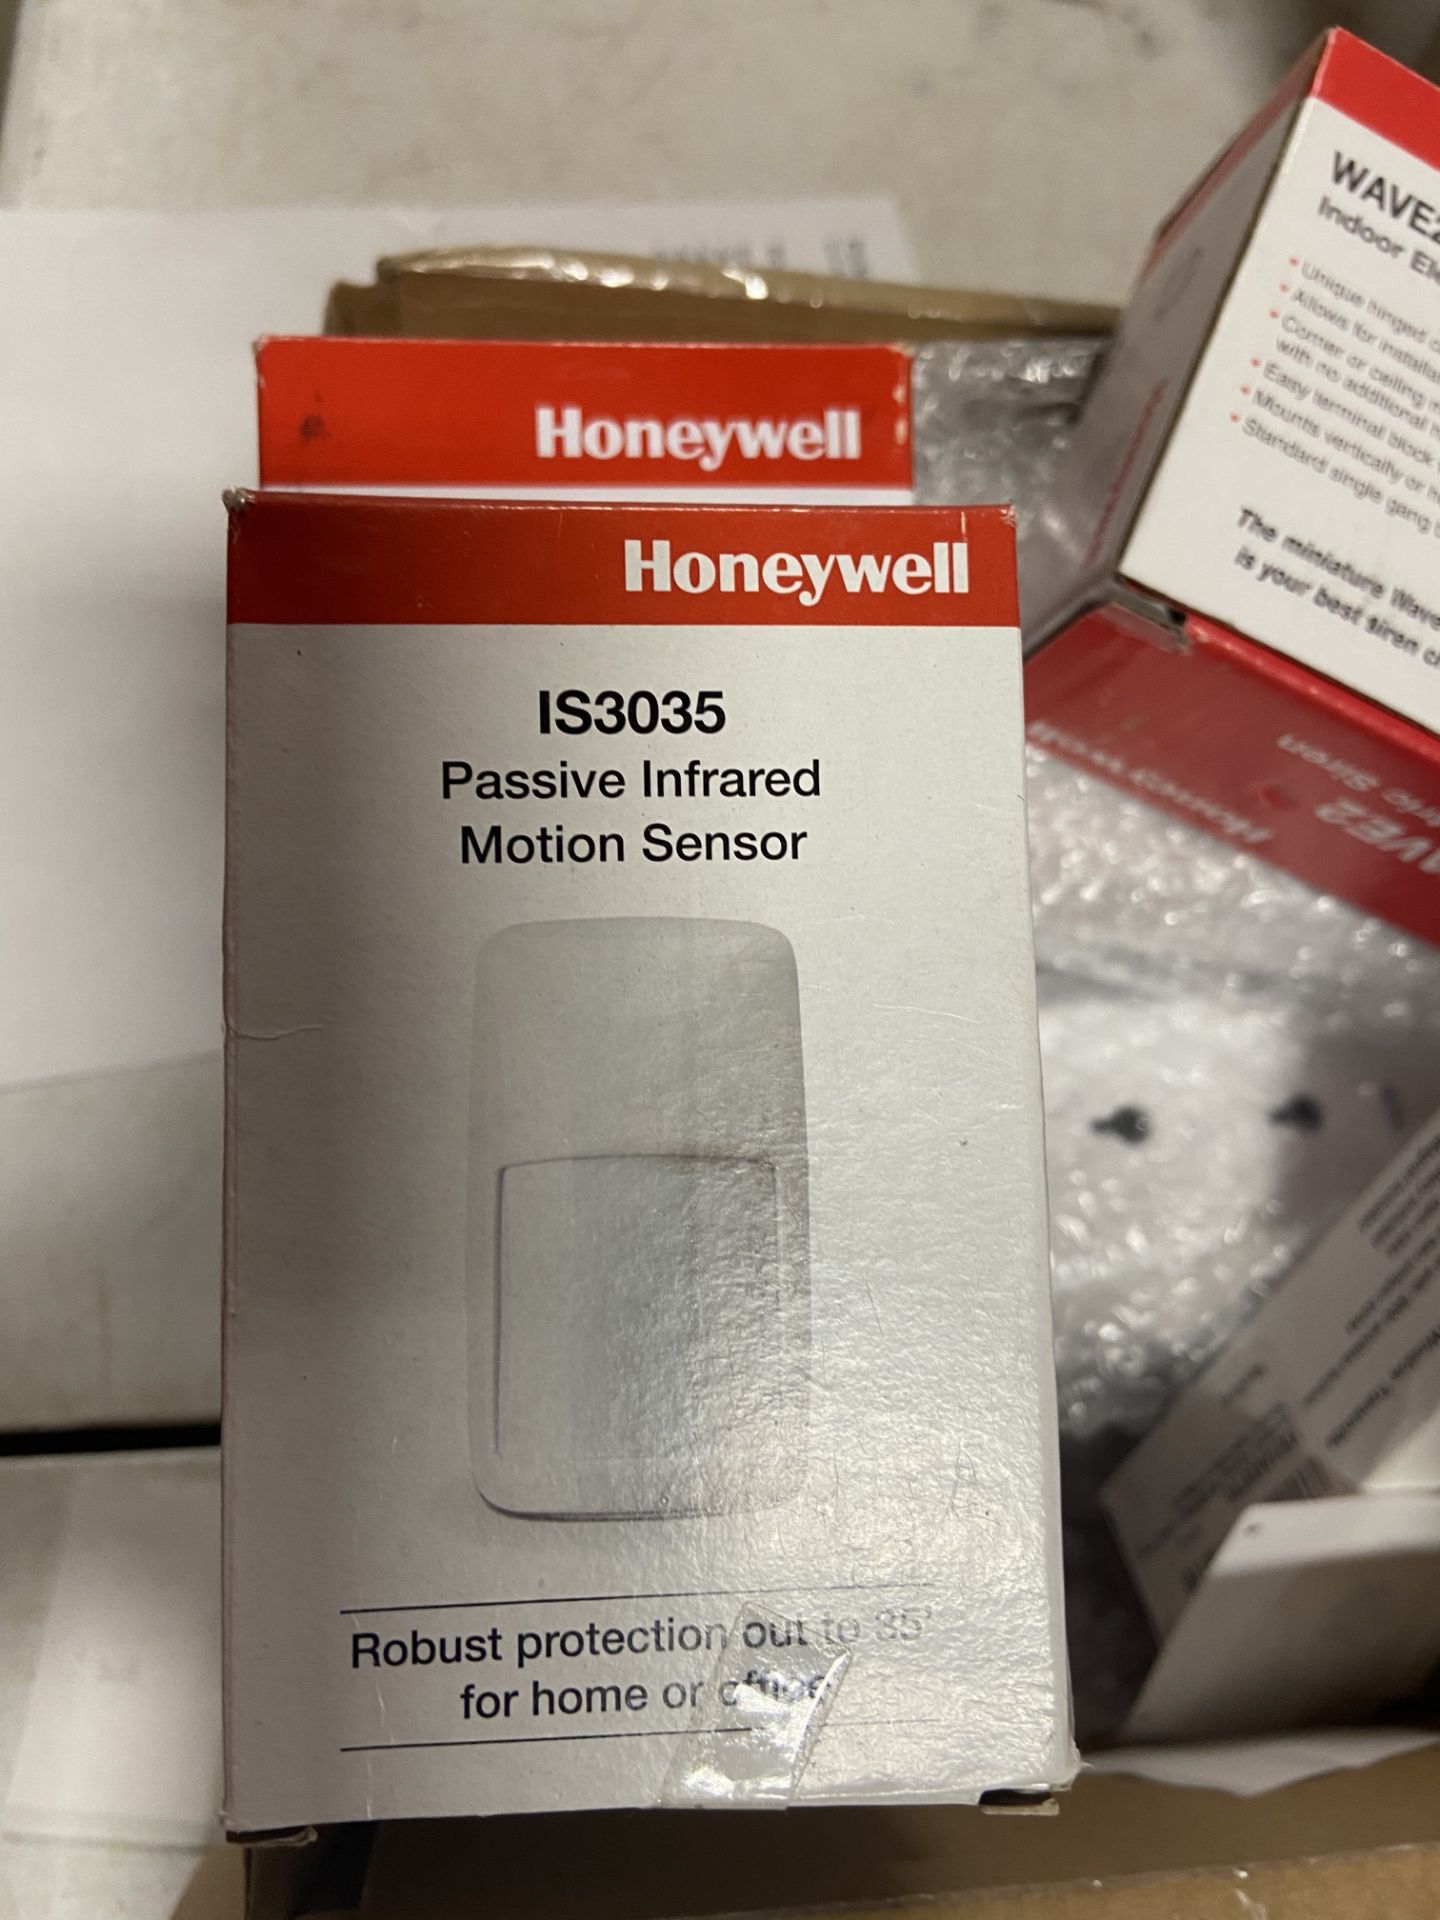 Miscellaneous Honeywell Security Products and Ethernet Surge Protectors (All Pictured), Rigging Fee: - Image 4 of 8